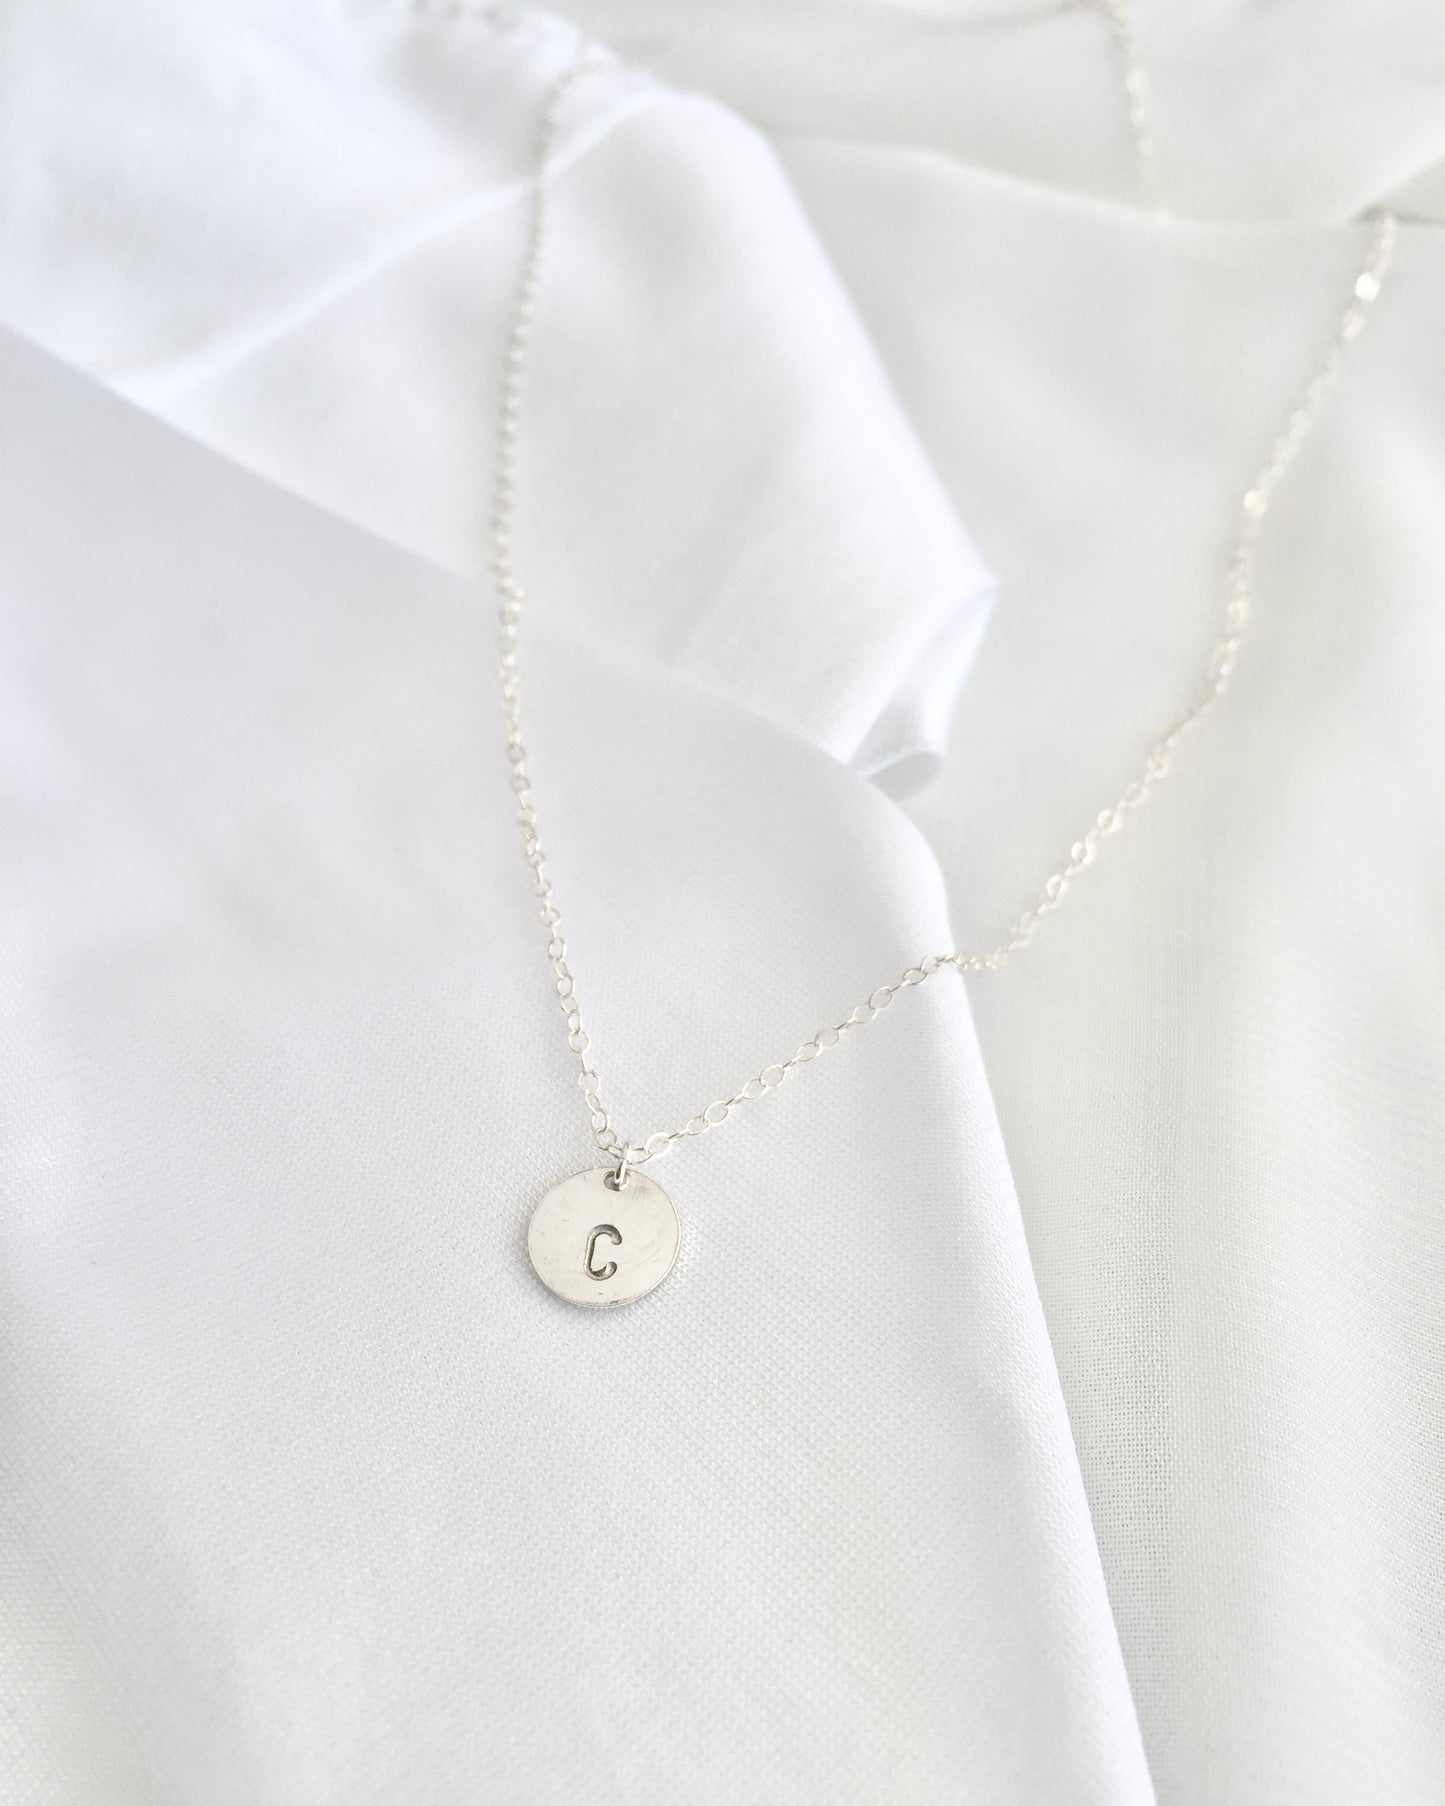 Delicate Initial Necklace in Sterling Silver or Gold Filled | Minimal Initial Necklace | Dainty Everyday Necklace | IB Jewelry